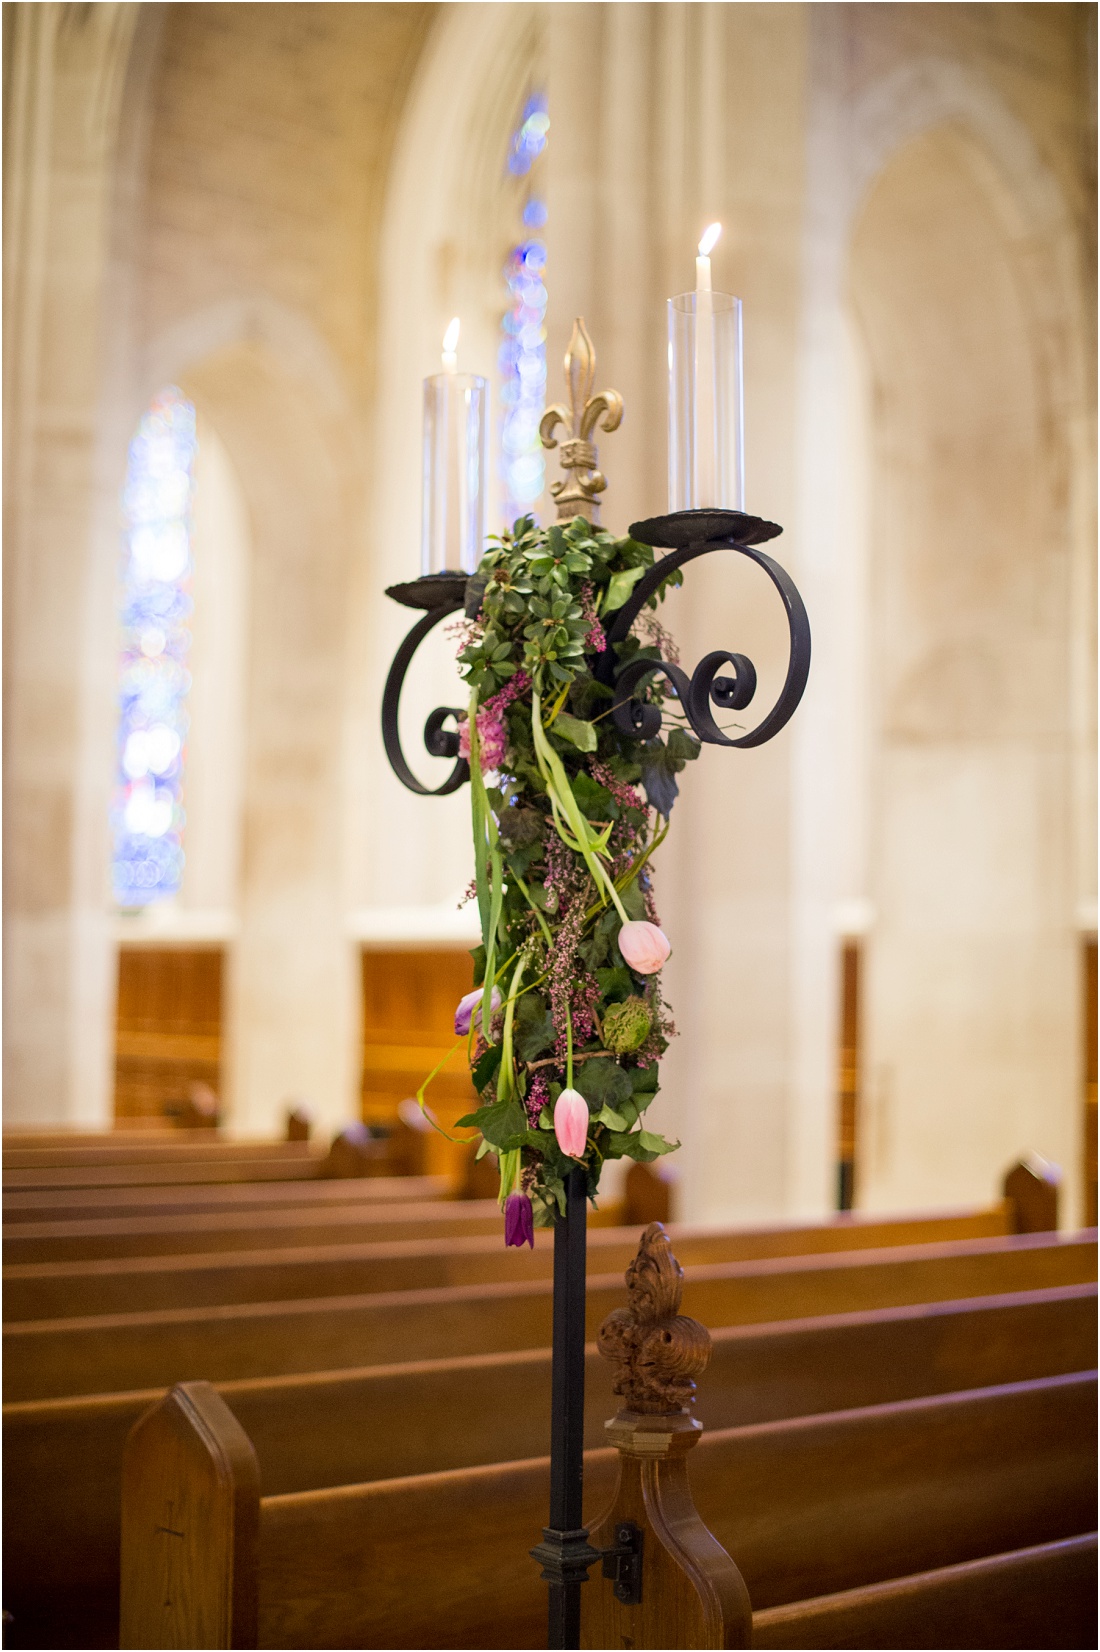 cathedral-antiques-show-faith-flowers-laurabarnesphoto-016